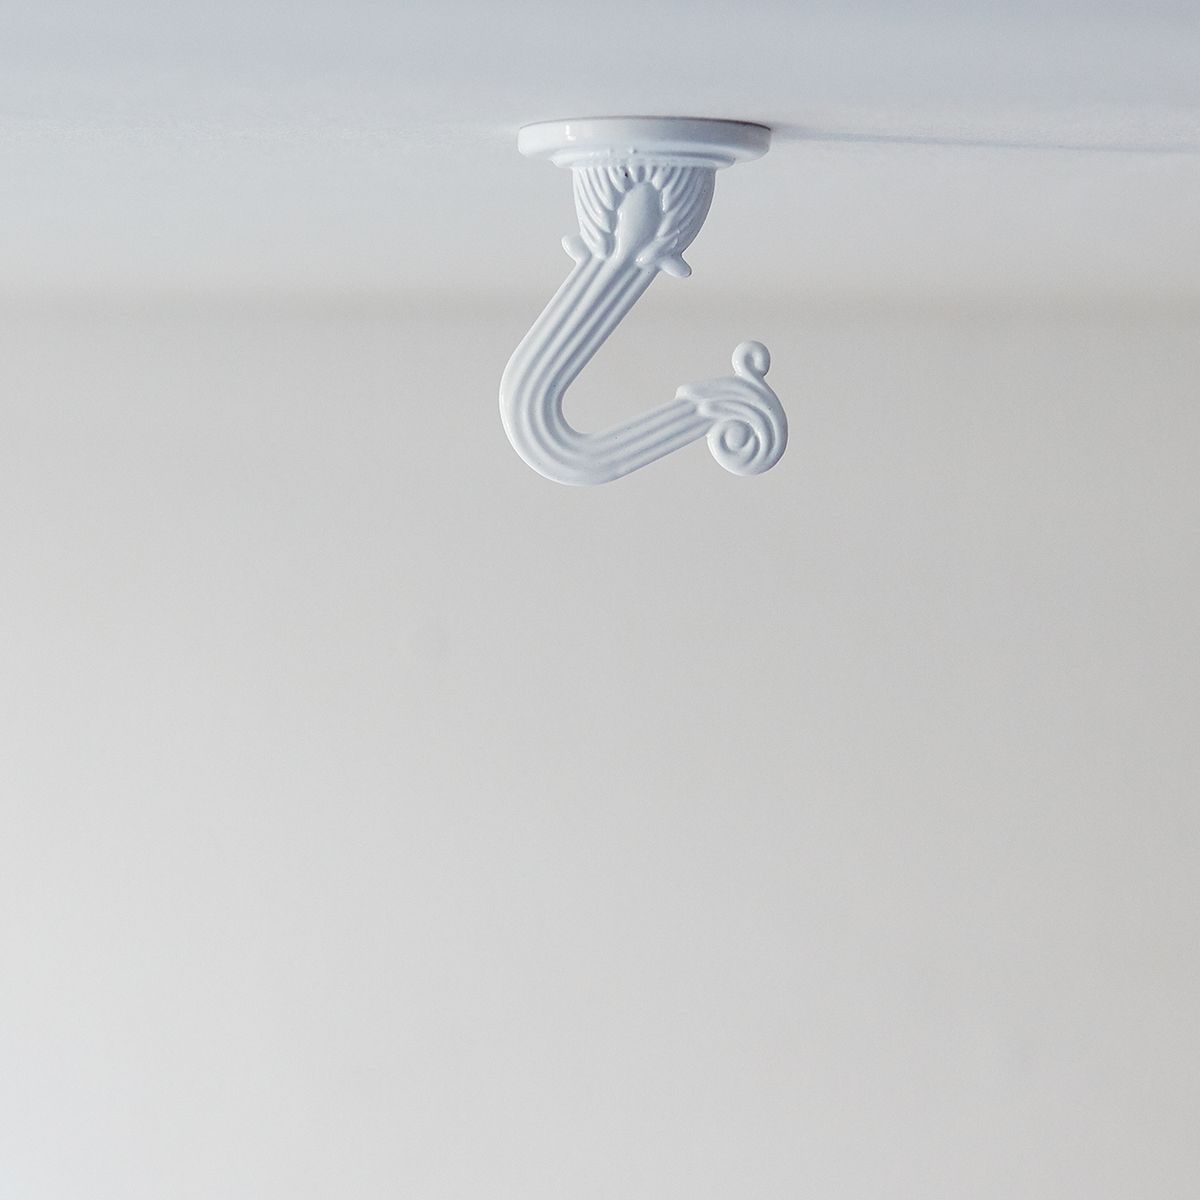 How do you hang a ceiling hook from a light?